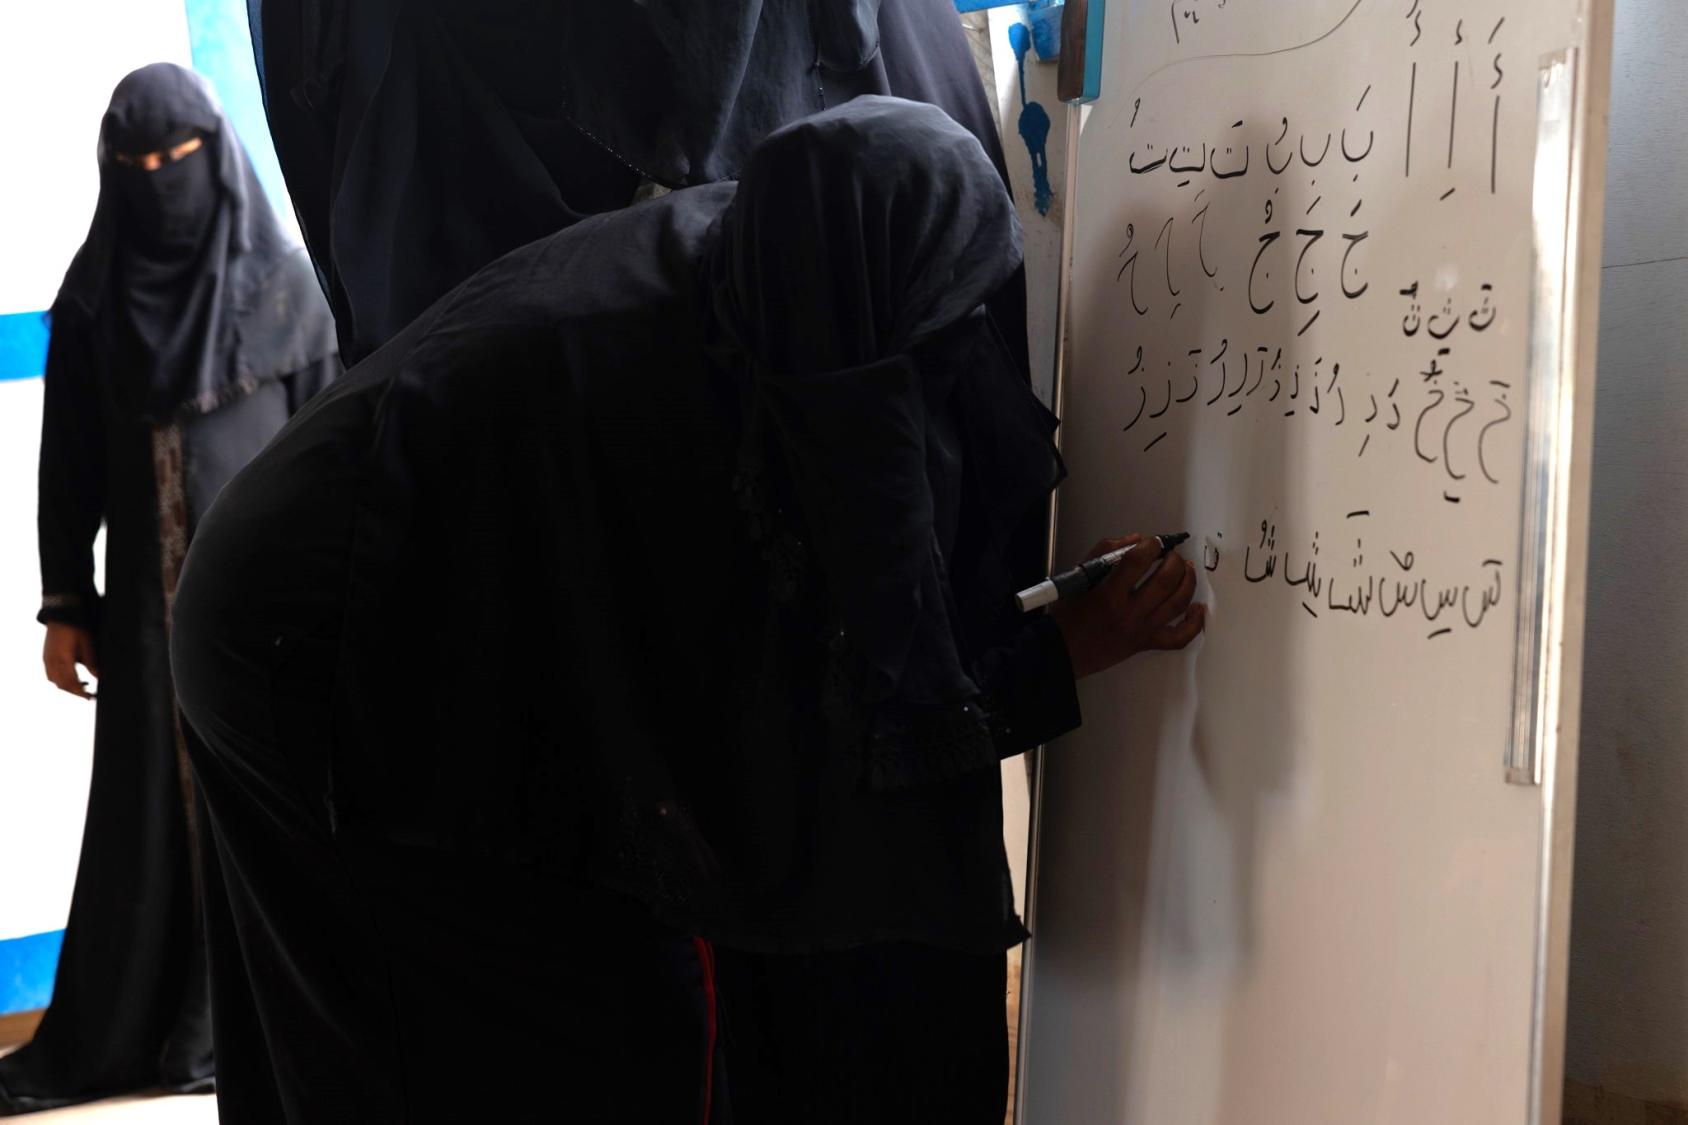 A woman in a black abaya, fully covered from head to toe, writes with a marker on a white board while another woman in grey looks on.